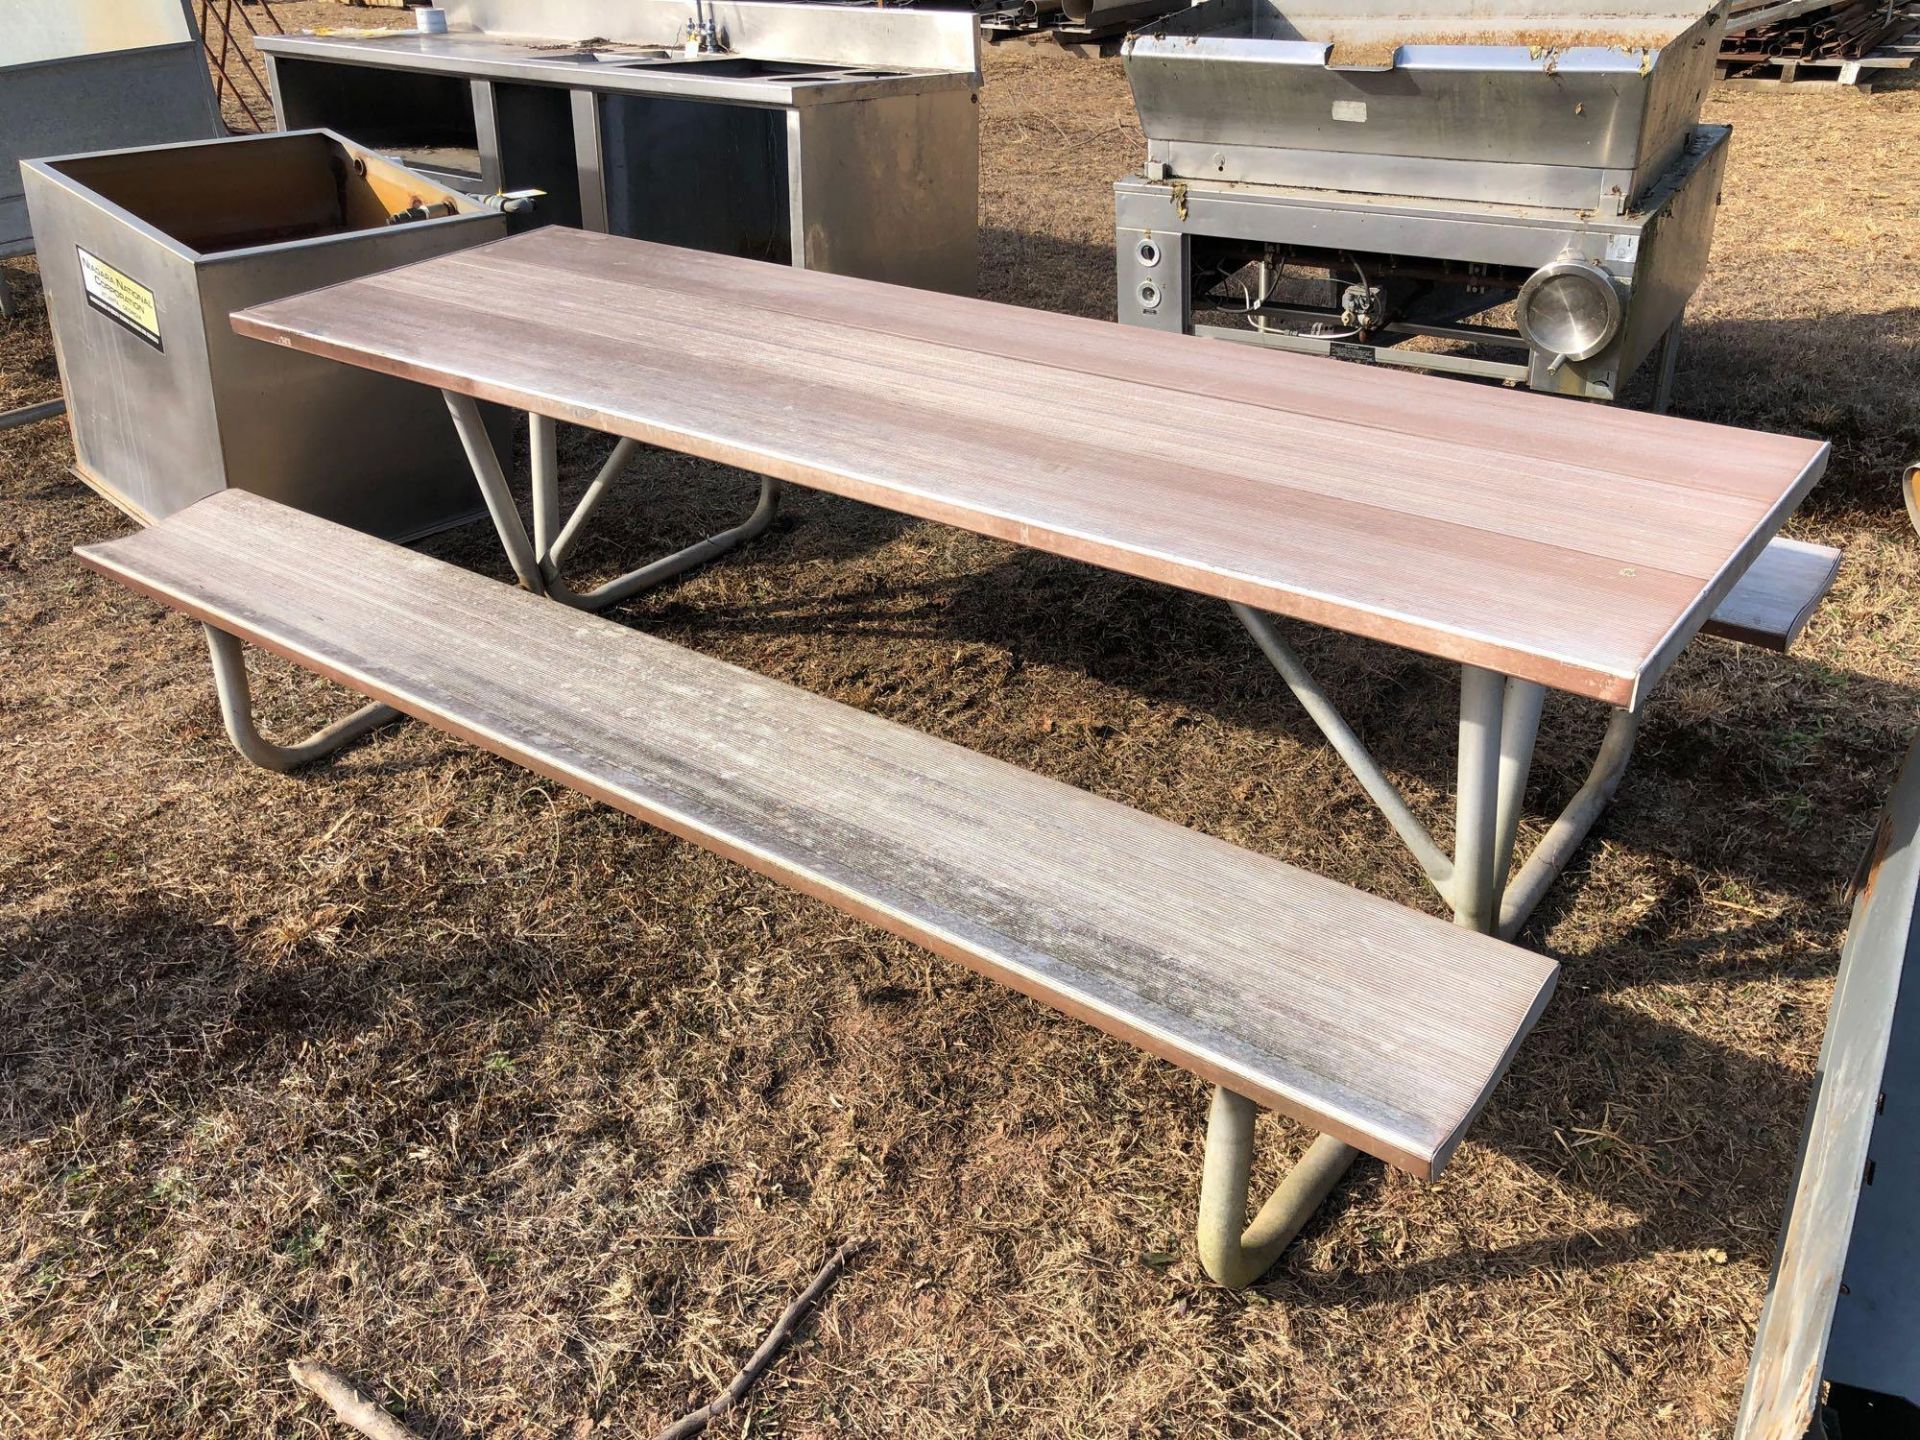 8ft Aluminum Picnic Table - Image 4 of 4